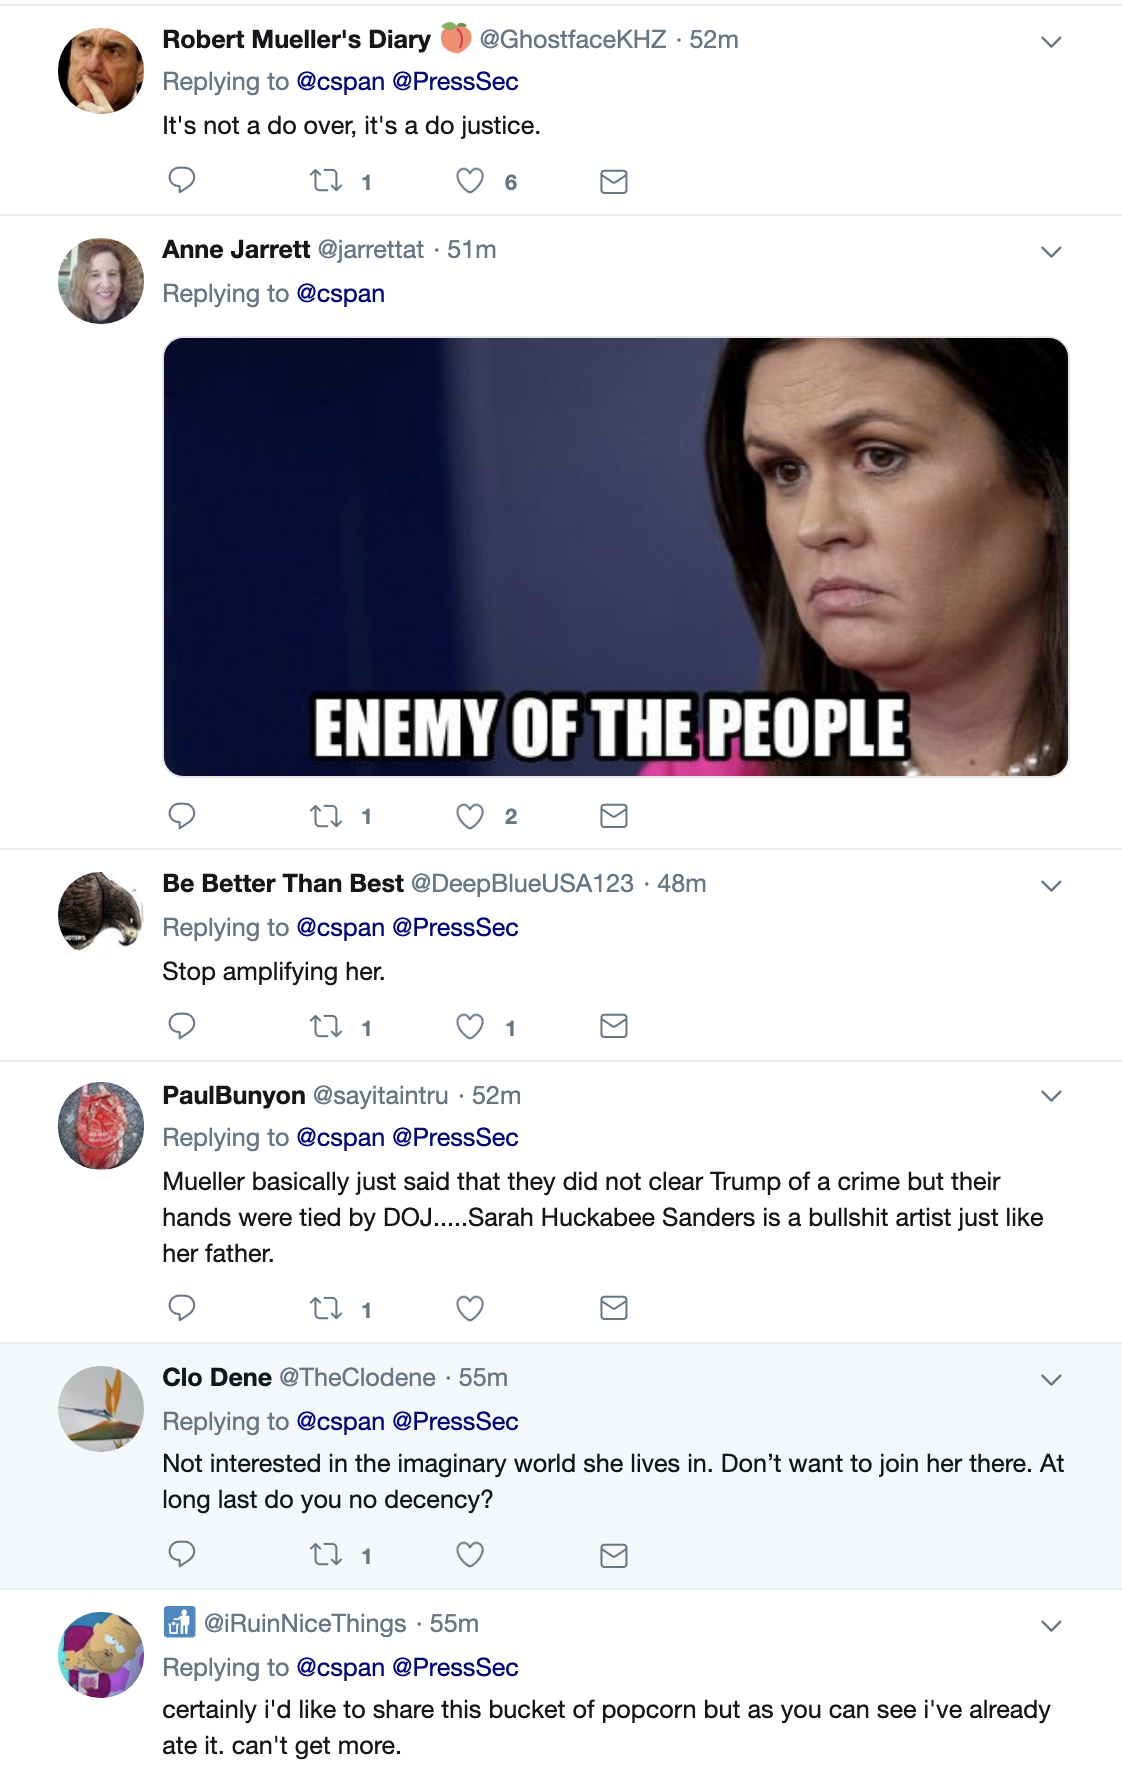 Screen-Shot-2019-05-29-at-2.13.20-PM White House Reporters Scoff At Sarah Sanders Over Mueller Remarks Corruption Crime Donald Trump Immigration Impeachment Media Mueller Politics Robert Mueller Russia Top Stories 